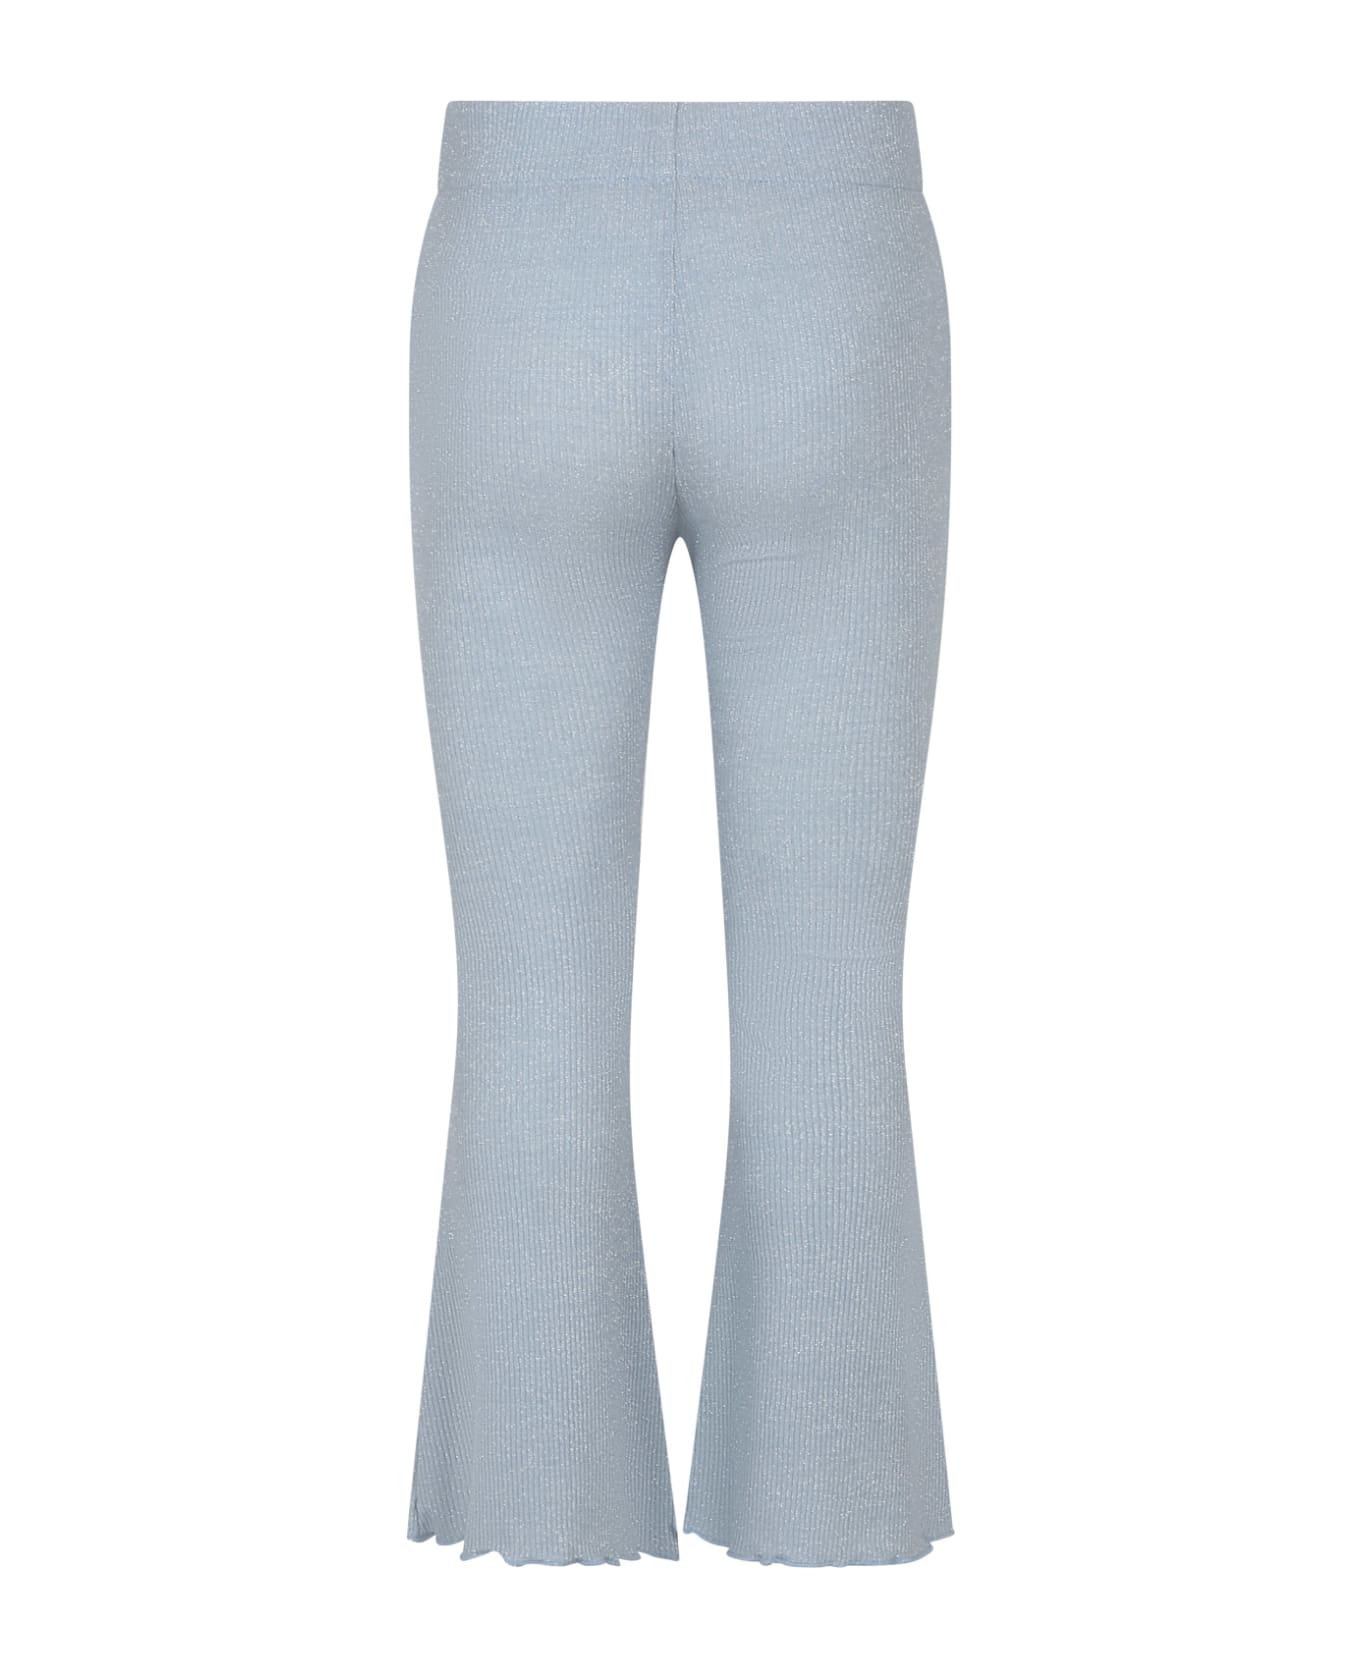 Caffe' d'Orzo Light Blue Trousers For Girl With Lurex - Light Blue ボトムス